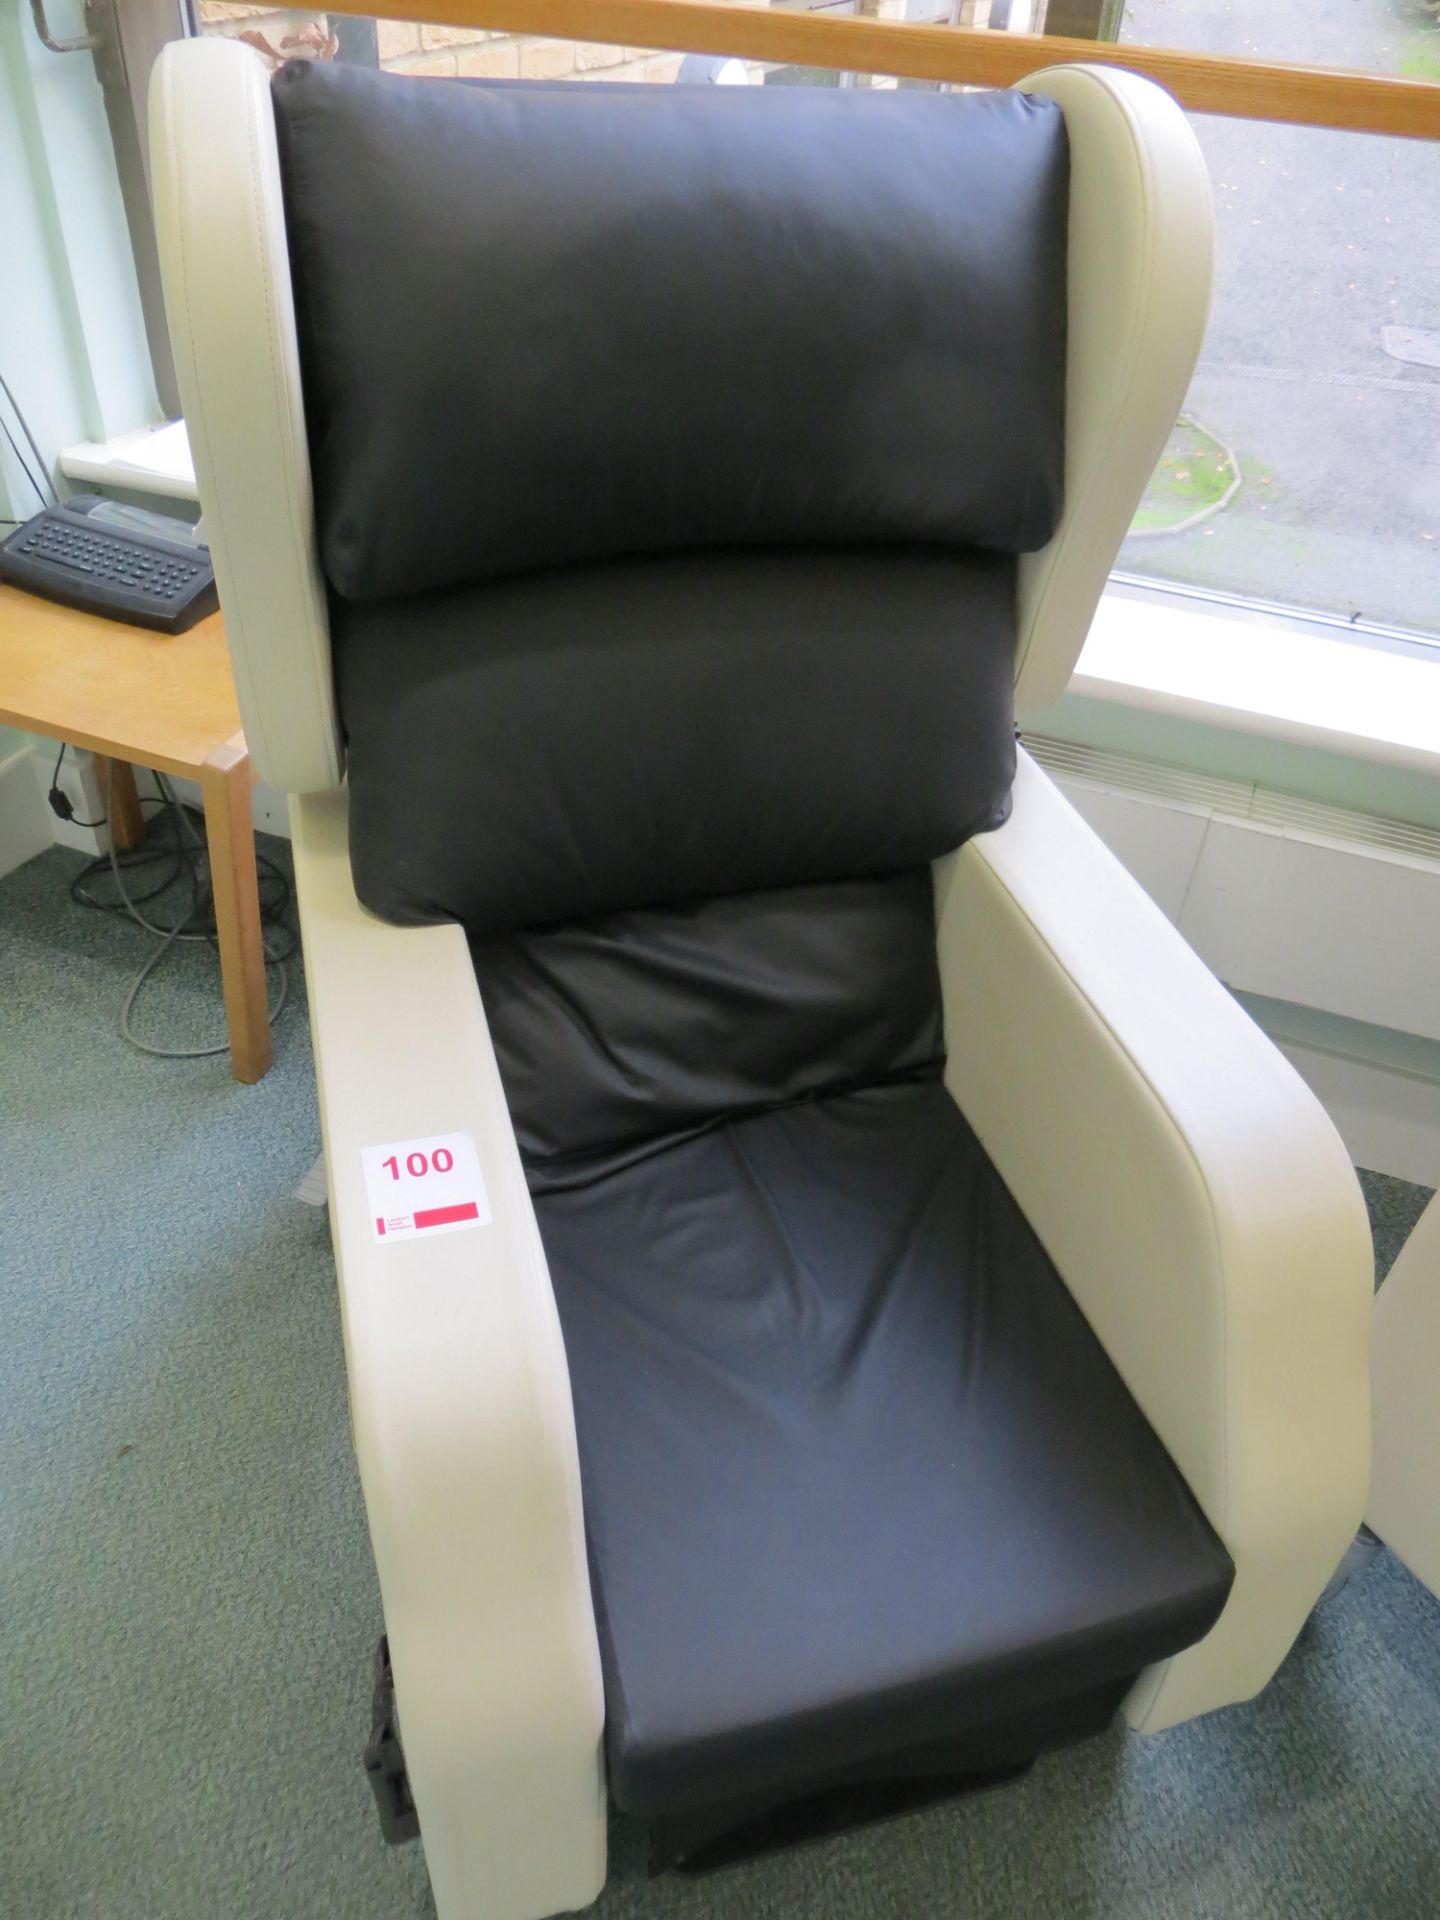 Seating Matters Monaco Riser electric reclining chair s/n M051714682 (2017) Max weight 300Kg seating